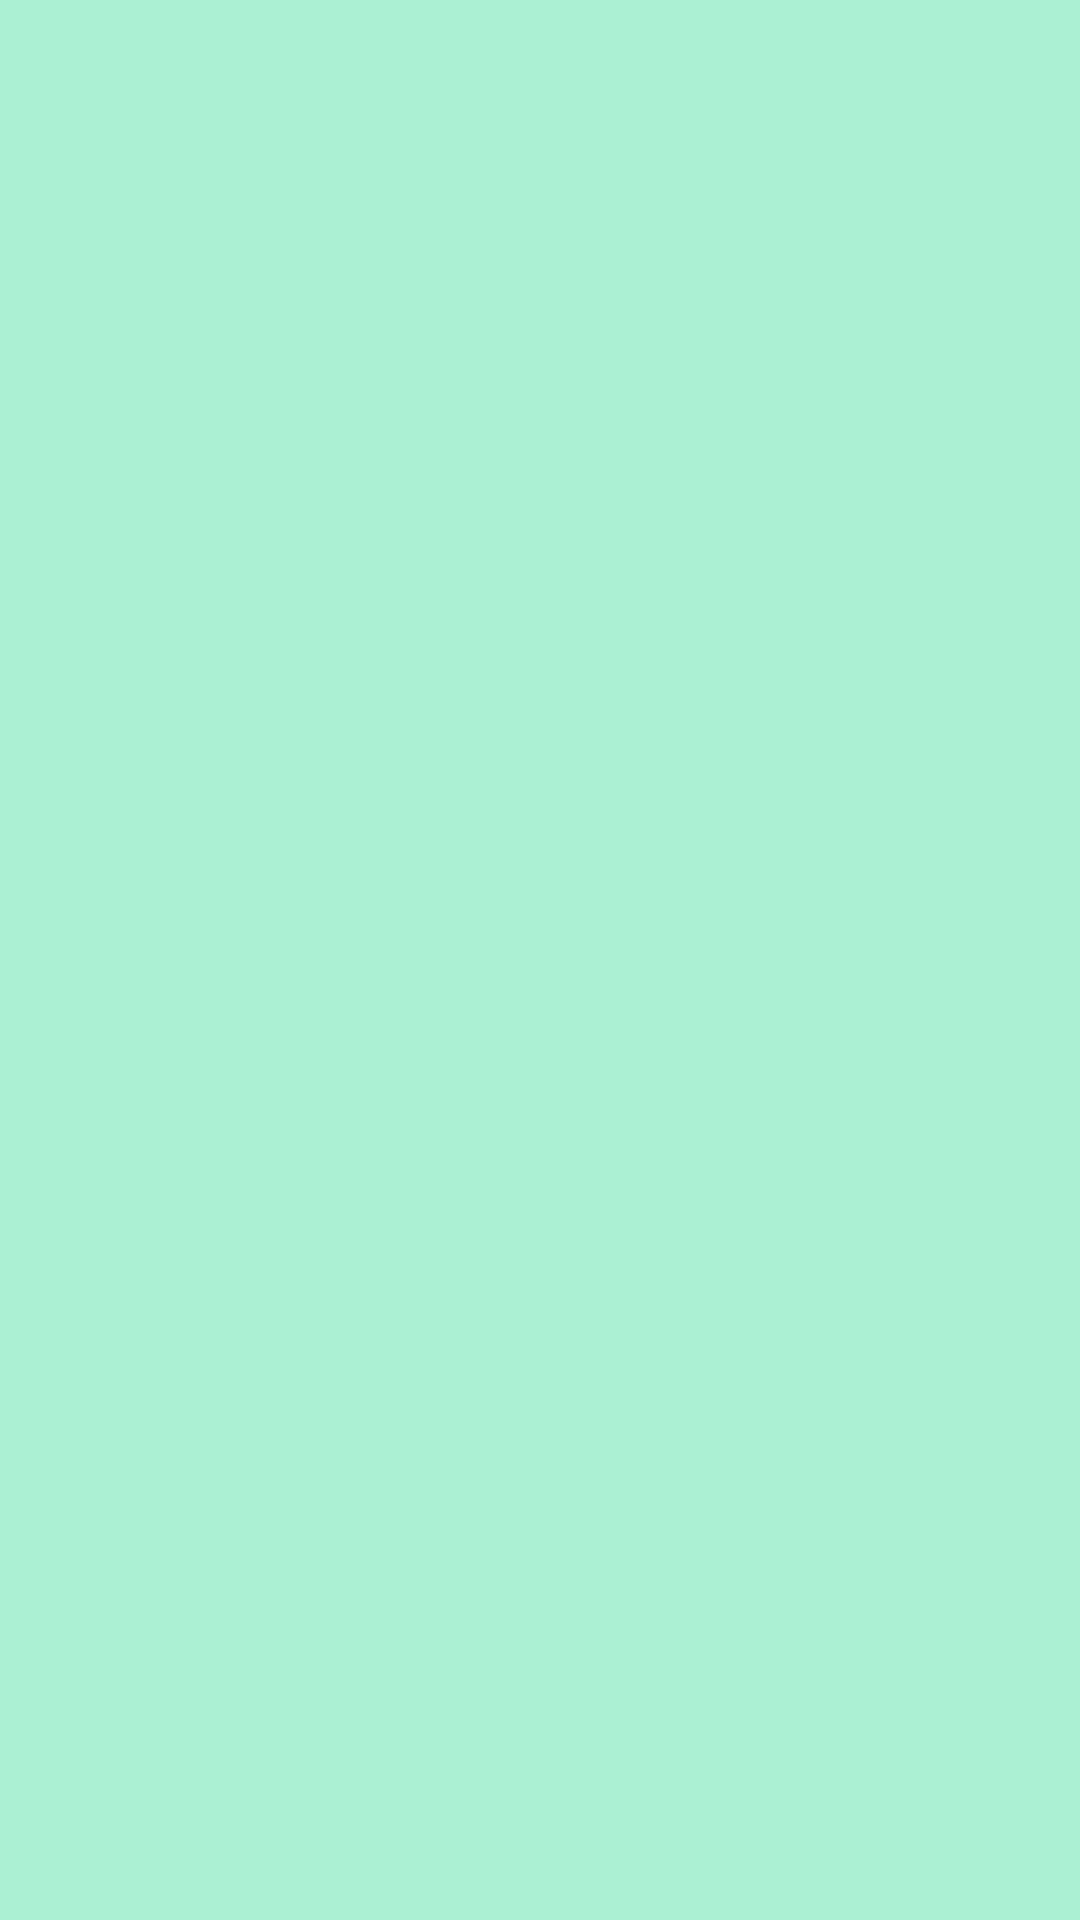 Pastel Green Background Cool Feeling